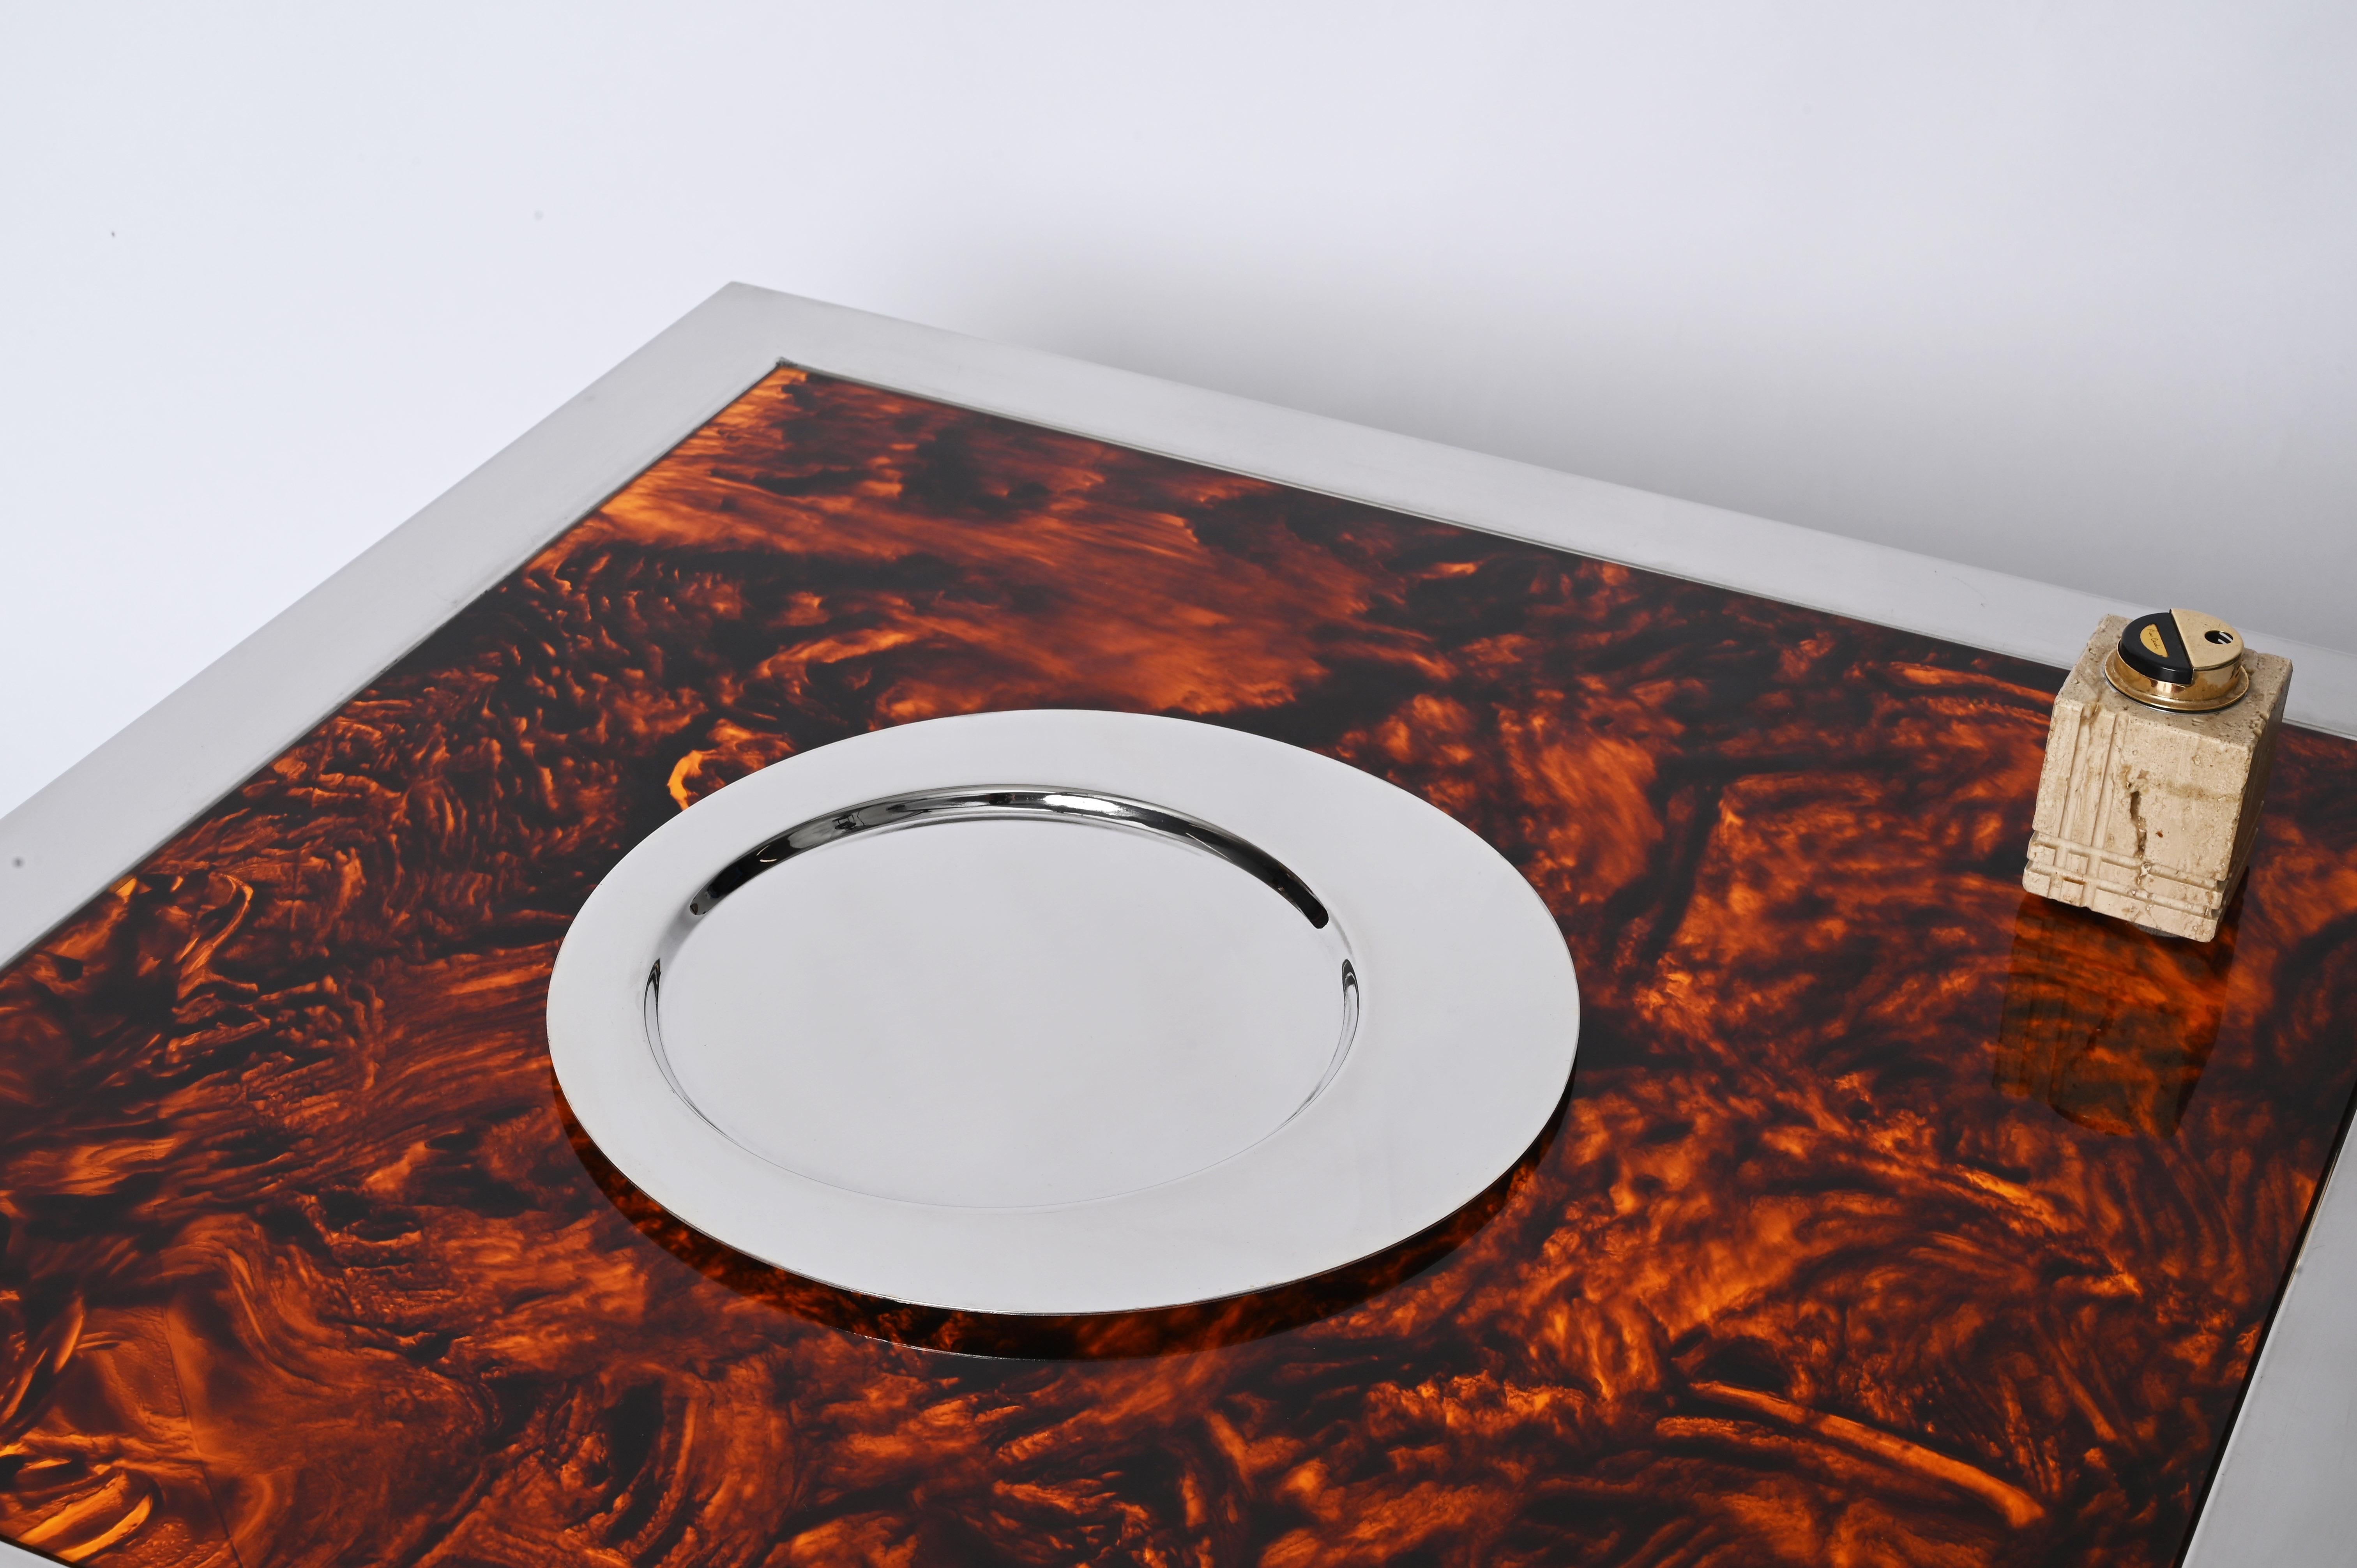 Chromed Steel and Tortoiseshell Effect Lucite Square Coffee Table, Italy 1970s For Sale 5